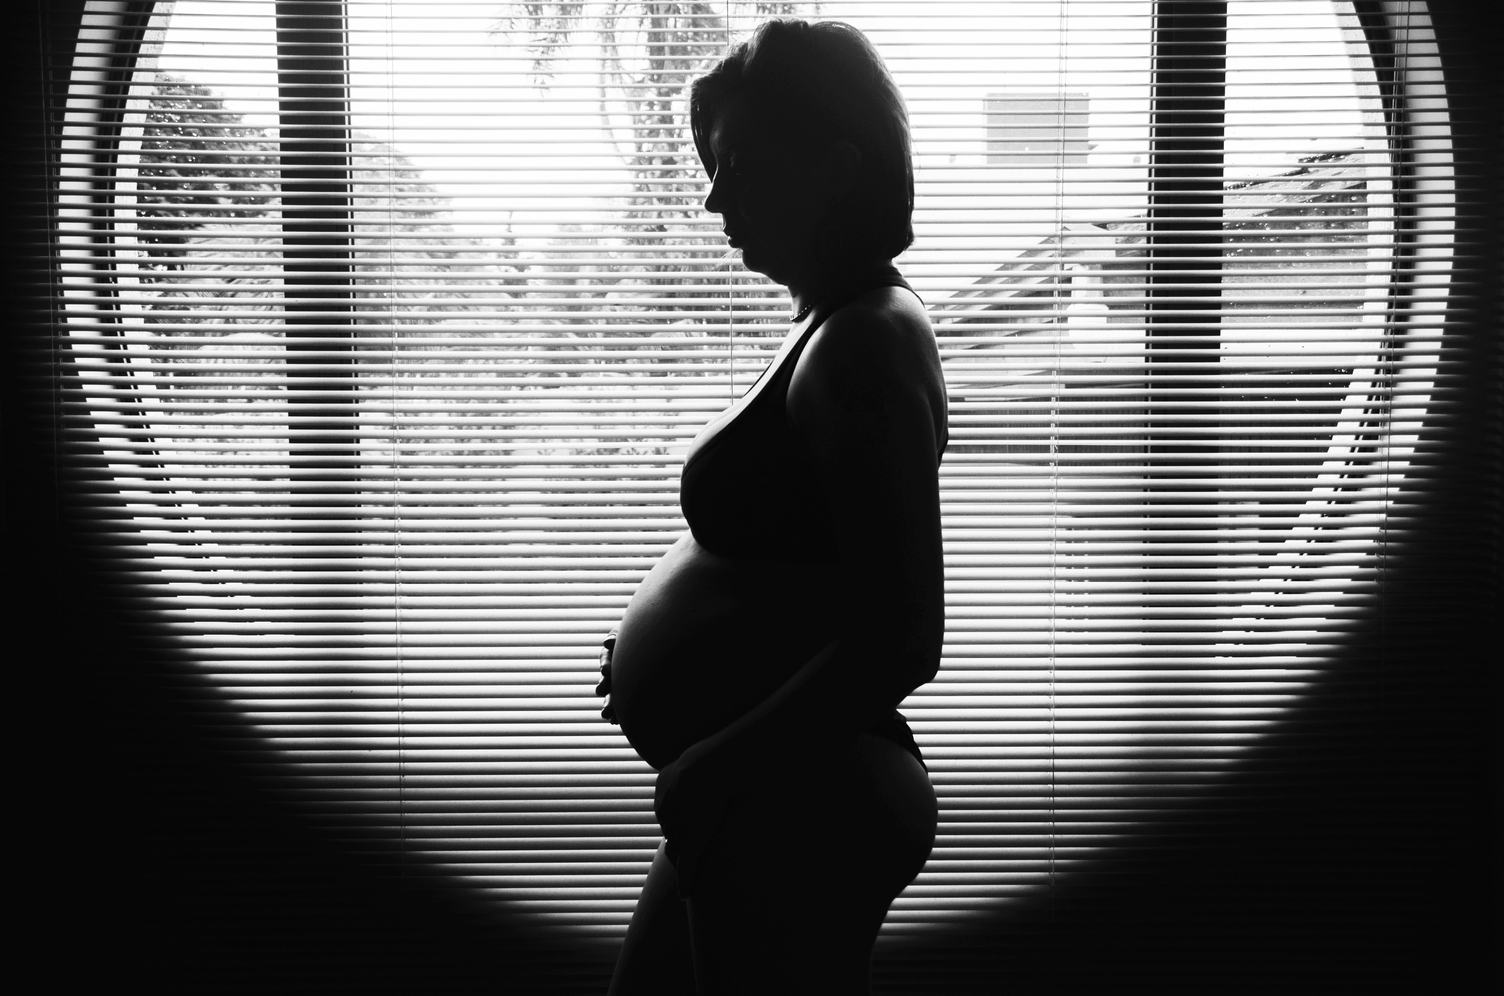 Black and White Picture of a Pregnant Woman